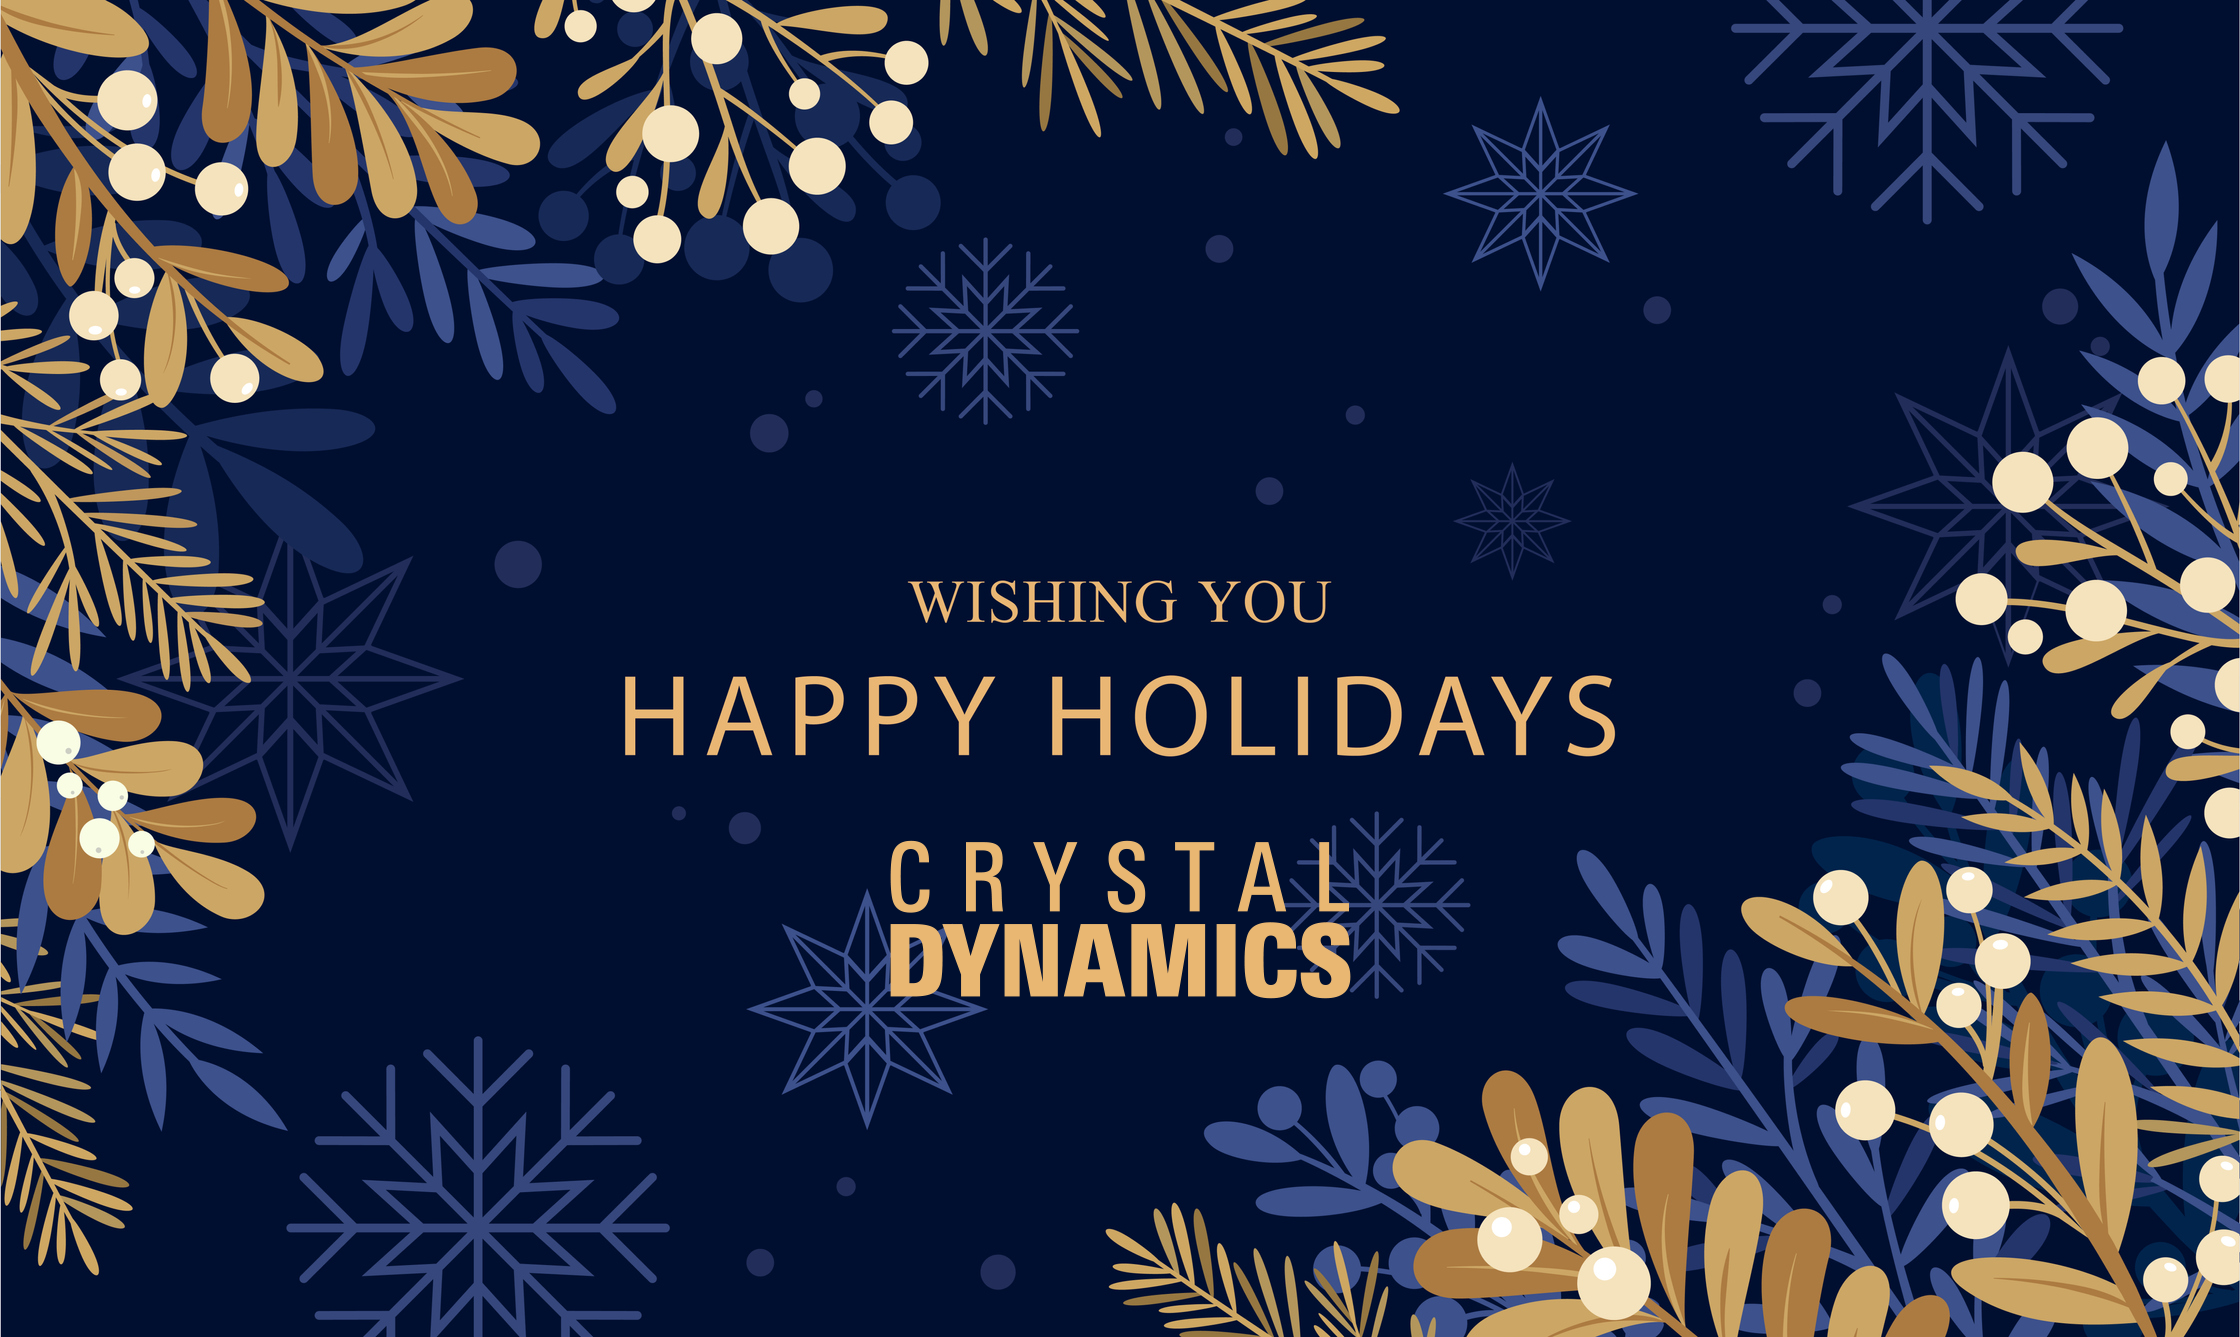 A festive image with a blue background,  light blue snowflakes, and gold leaves. There is text that reads: Wishing you Happy Holidays - Crystal Dynamics".